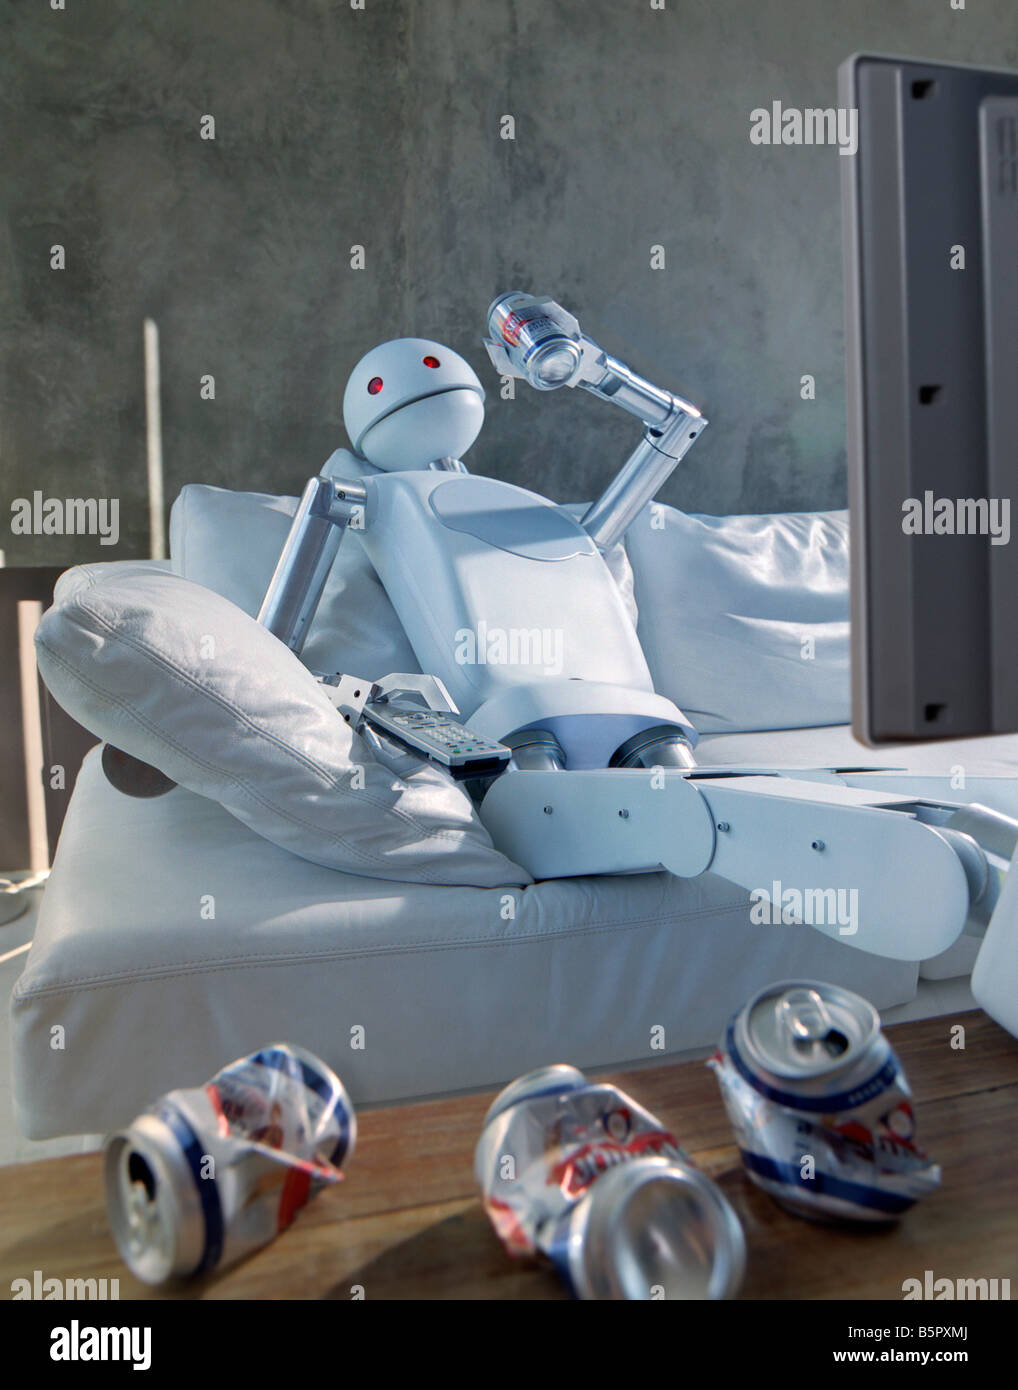 A drunk robot watching television Stock Photo - Alamy